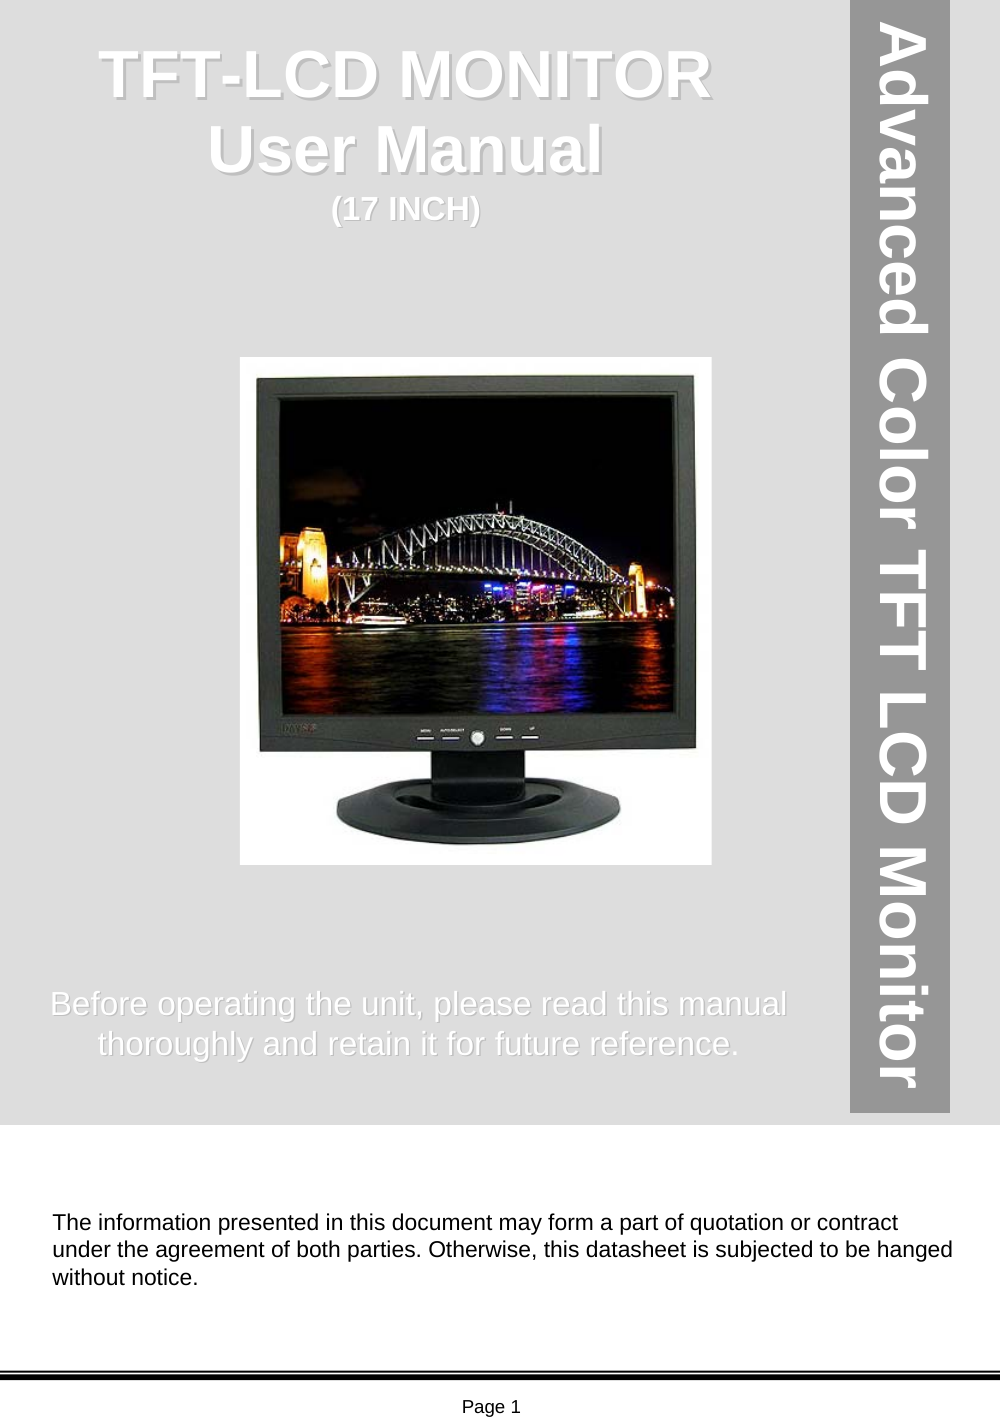 Page 117 inch SXGA TFT LCD Color Monitor Advanced Color TFT LCD MonitorThe information presented in this document may form a part of quotation or contract under the agreement of both parties. Otherwise, this datasheet is subjected to be hanged without notice.TFTTFT--LCD MONITORLCD MONITORBefore operating the unit, please read this manual Before operating the unit, please read this manual thoroughly and retain it for future referencethoroughly and retain it for future reference.User Manual User Manual (17 INCH)(17 INCH)